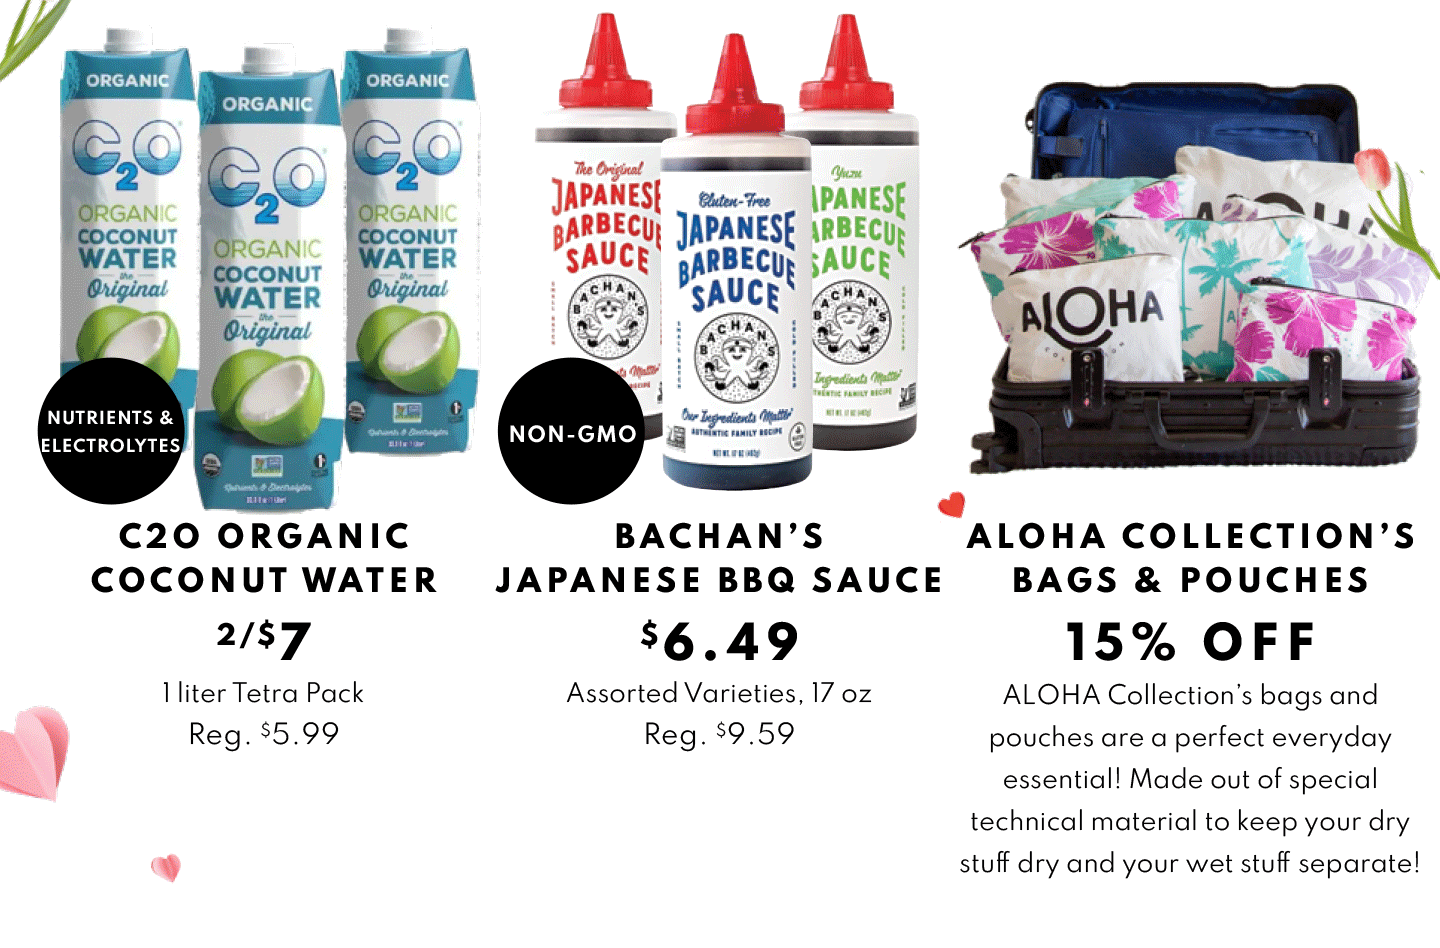 C2O Organic Coconut Water 2/$7, Bachan's Japanese BBQ Sauce $6.49 and Alona Collection's Bgs and Pouches 15% OFF